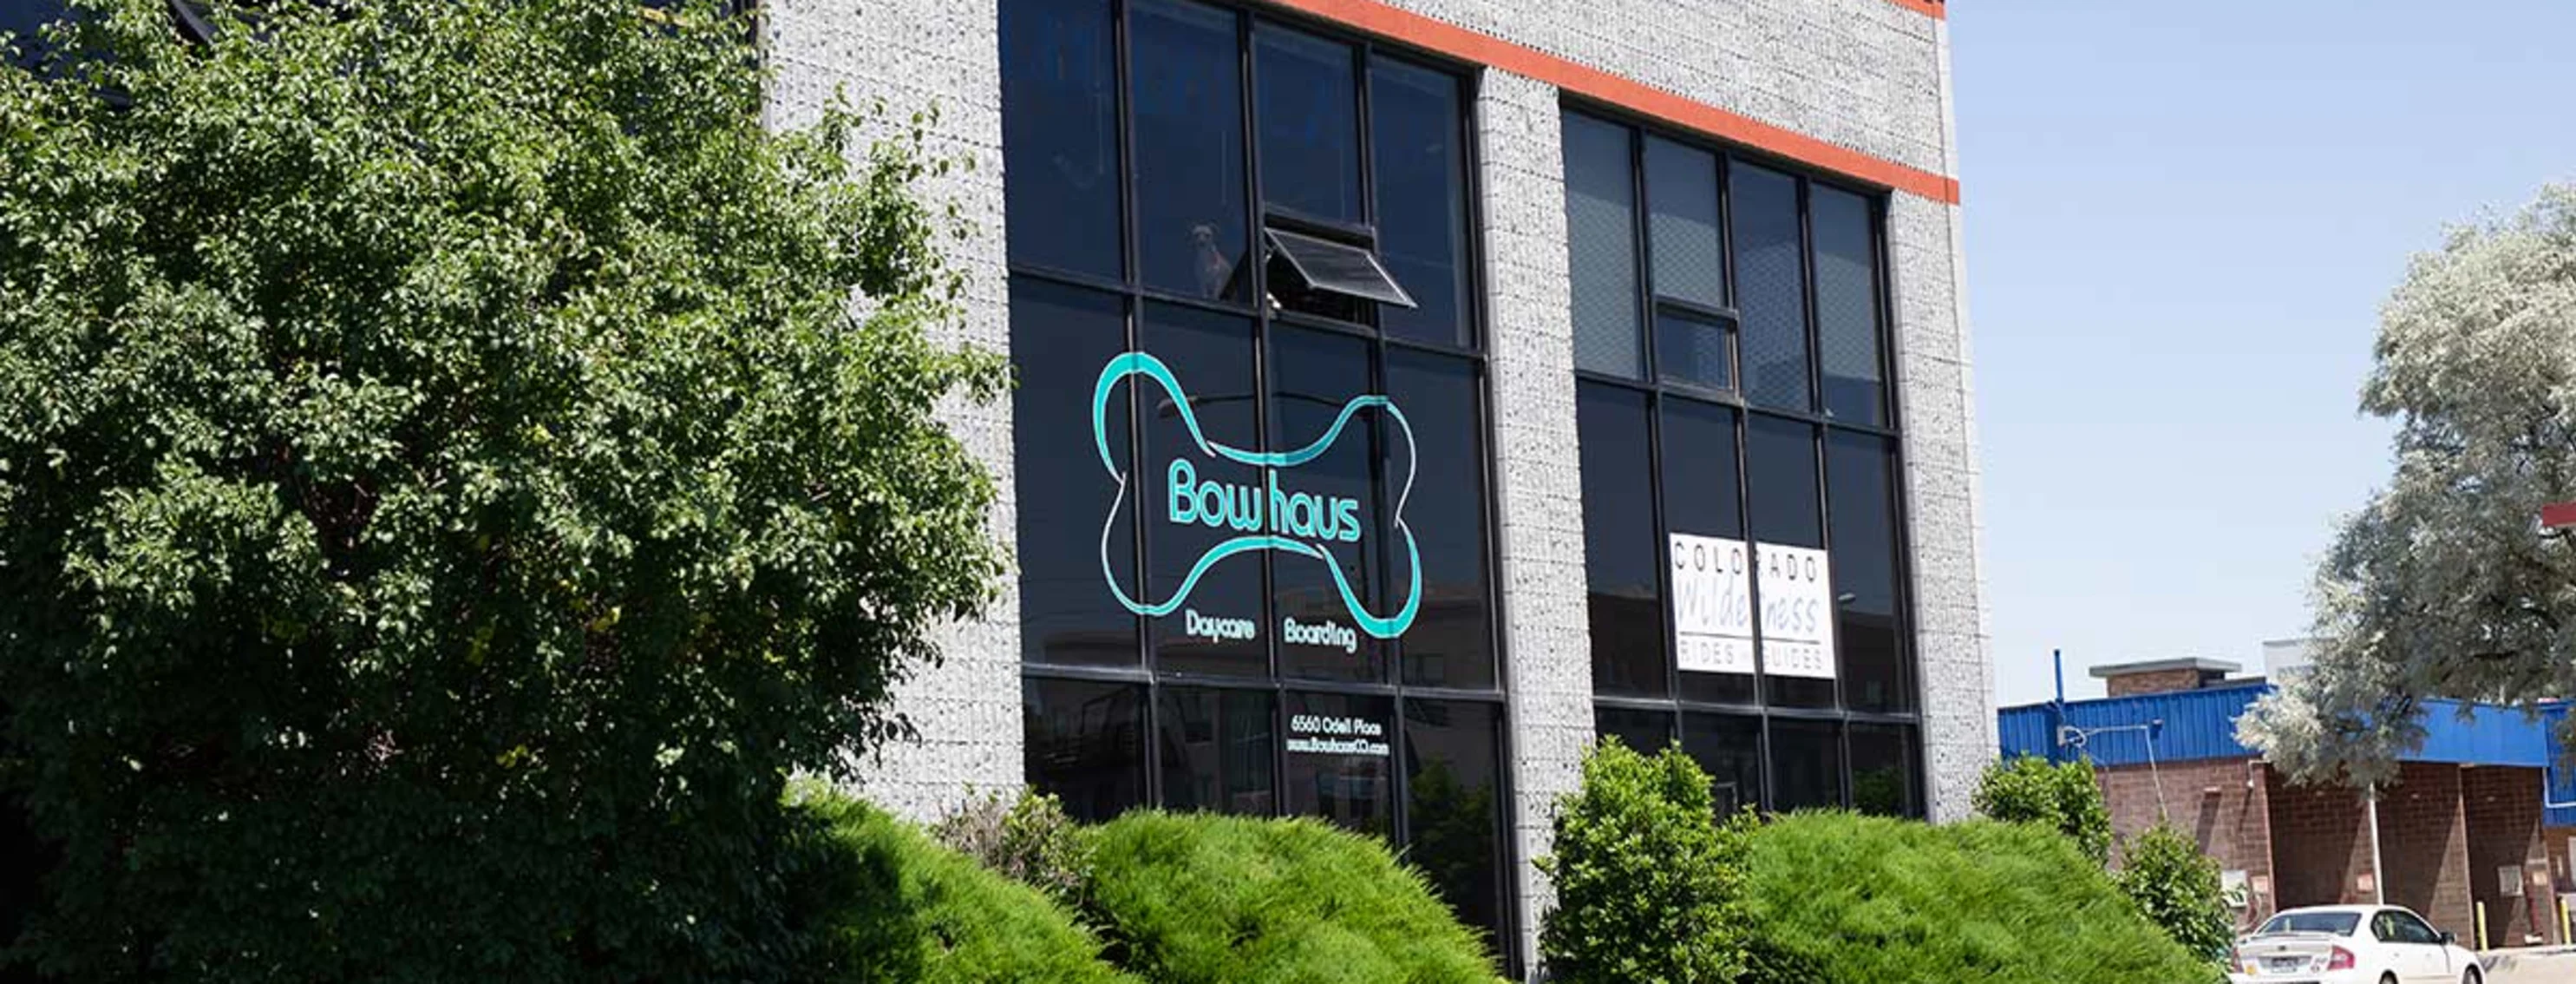 Bowhaus Boulder facility, expert dog daycare, boarding, and grooming services in Boulder, Colorado.